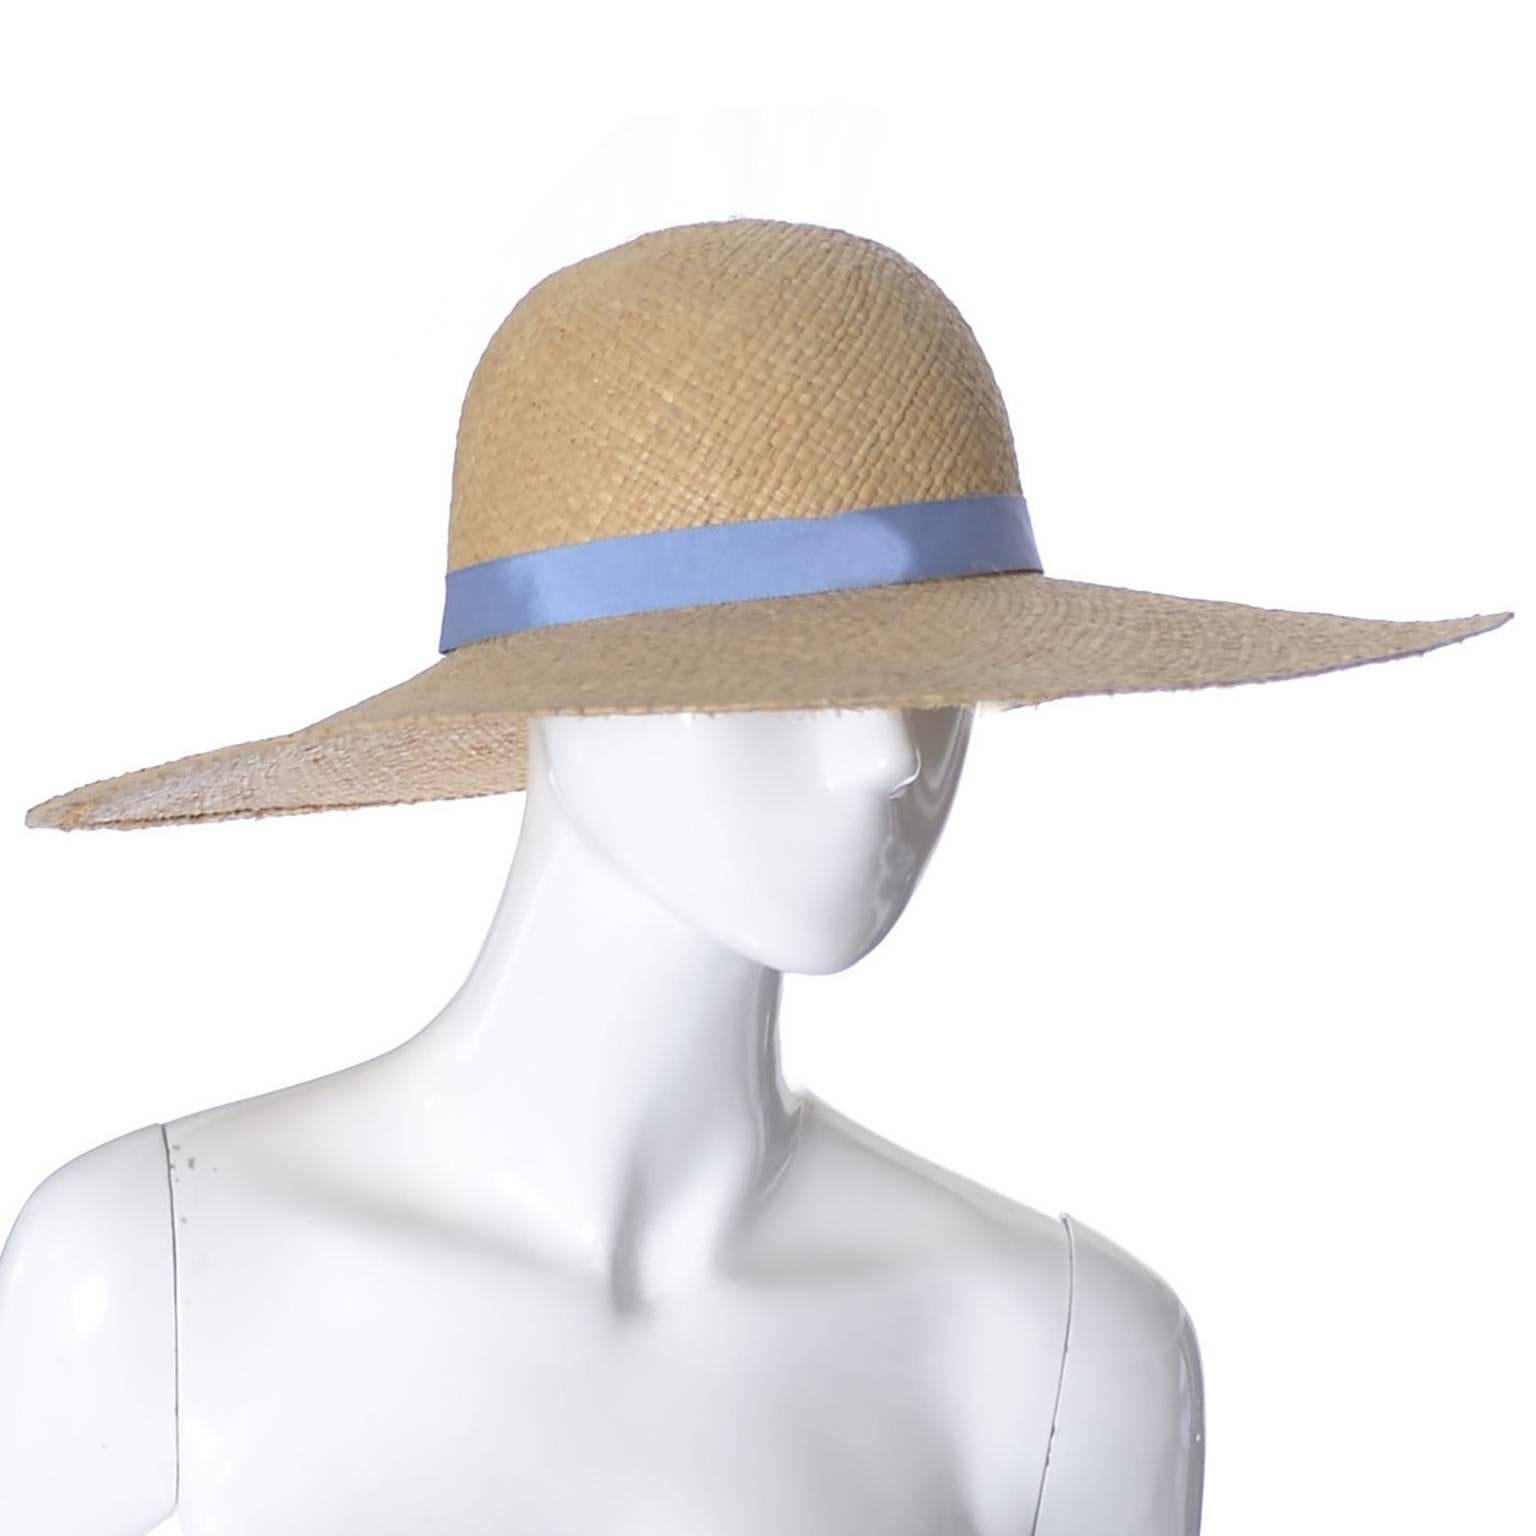 straw hat with blue ribbon